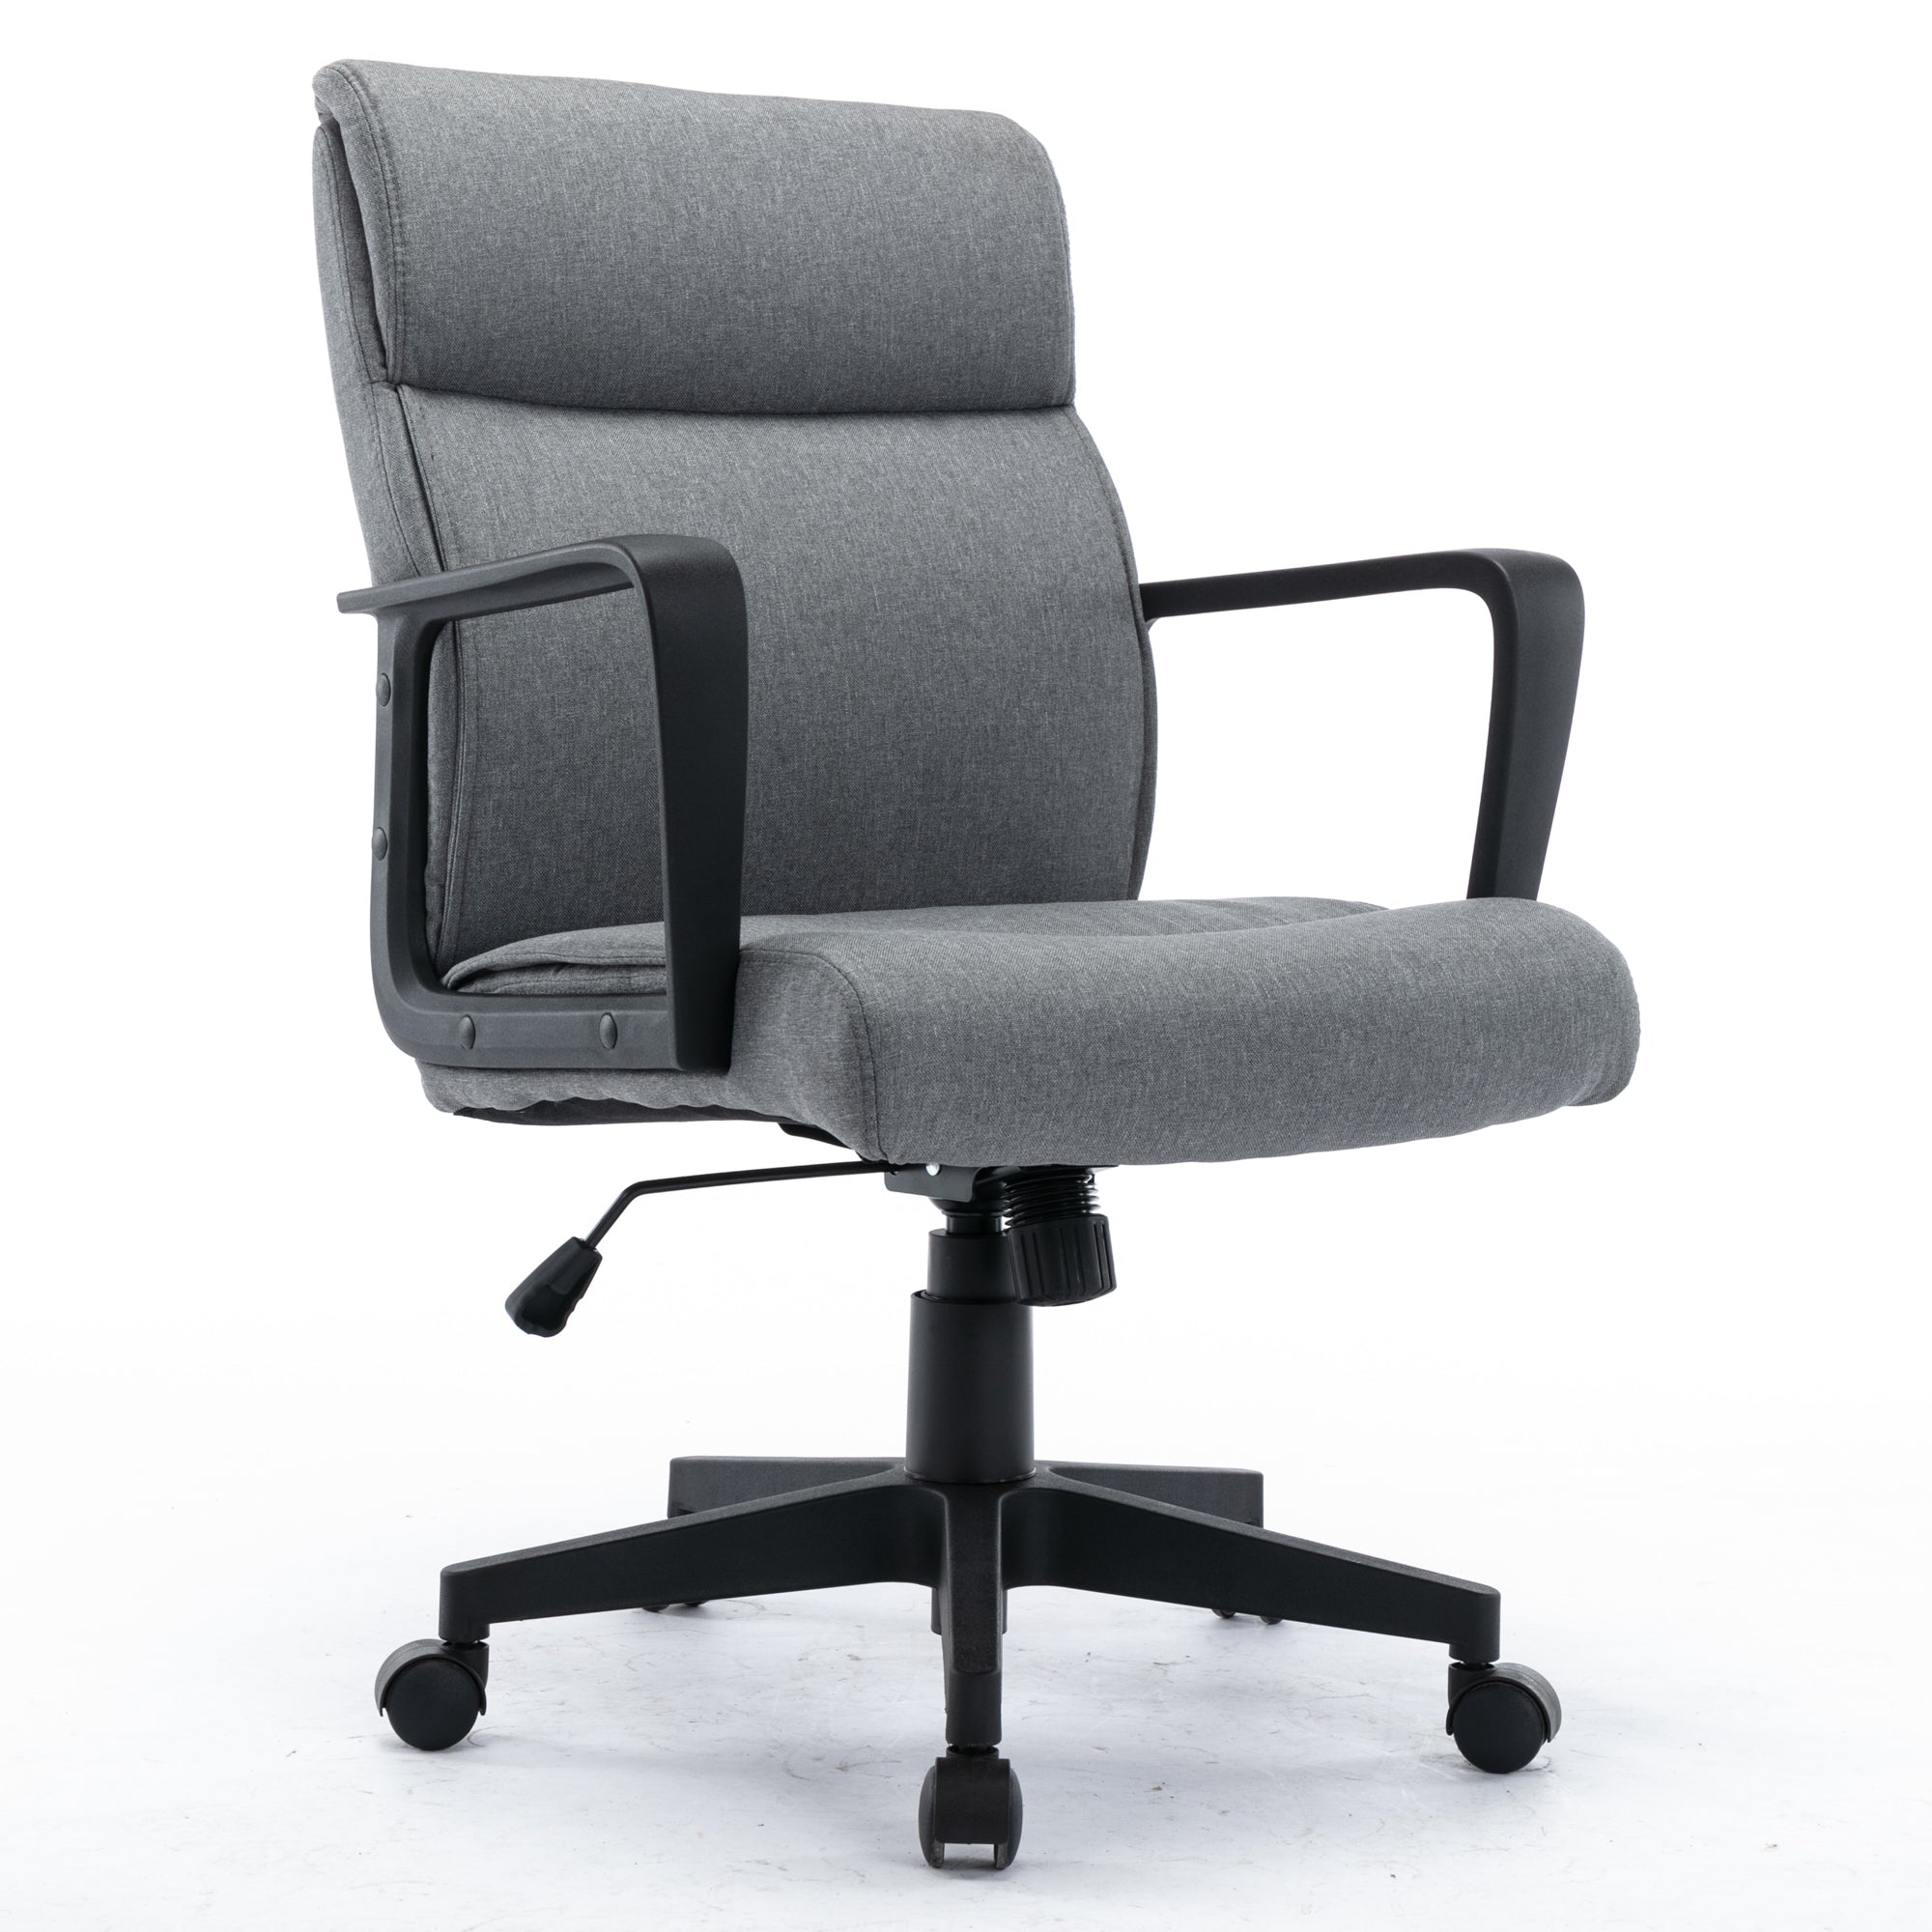 RaDEWAY Office Chair Spring Cushion Mid Back Executive Desk Fabric Chair with PP Arms 360 Swivel Task Chair